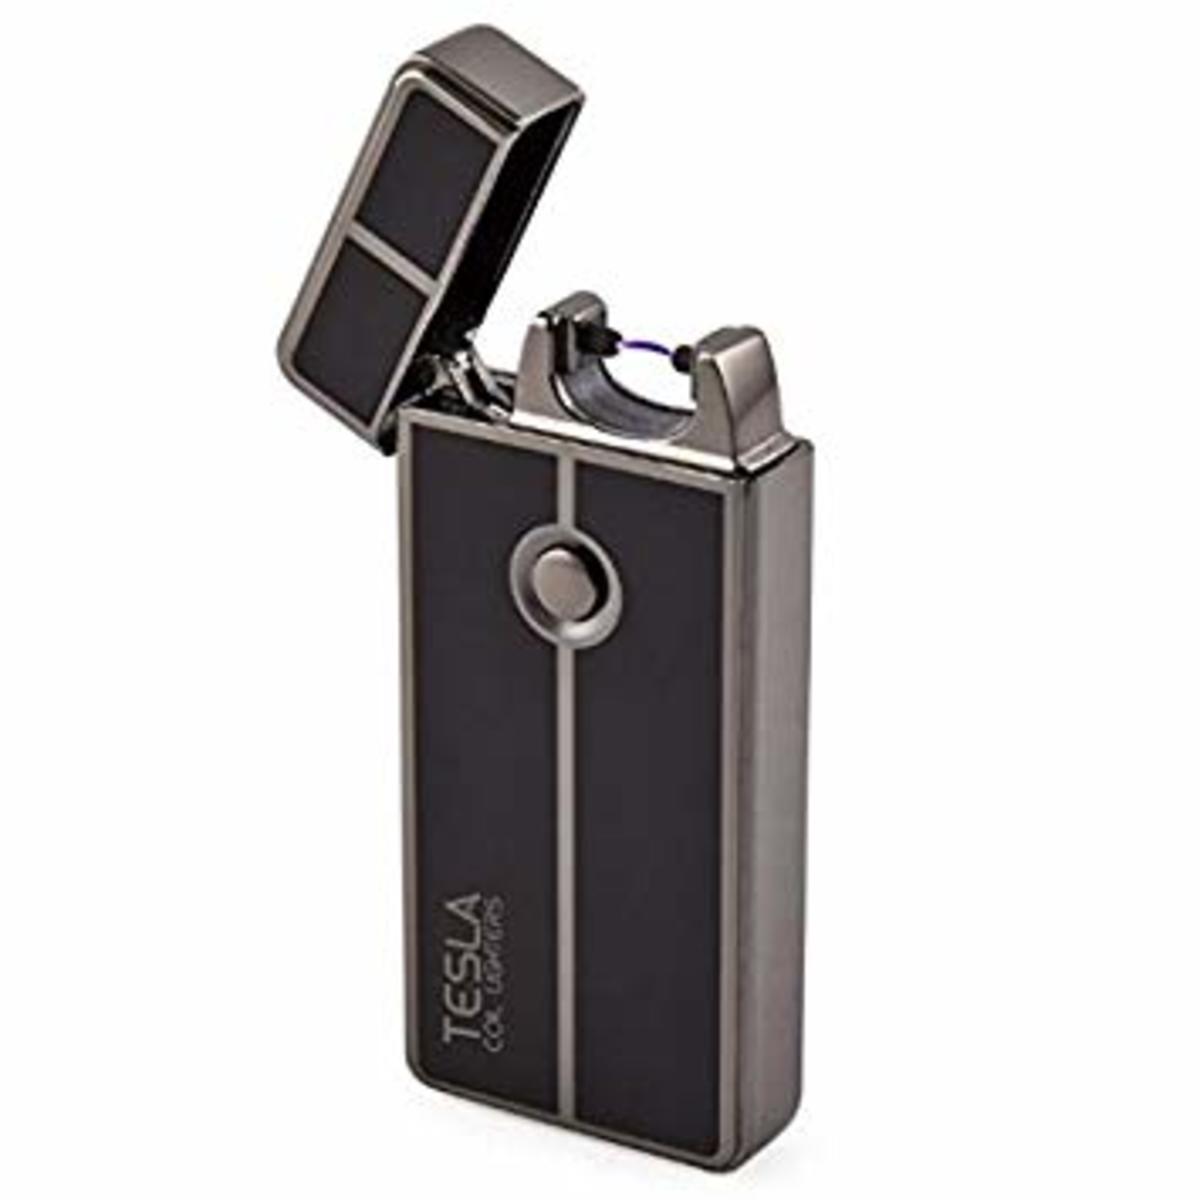 9. Tesla electric arc/plasma lighter—lighters are like vehicles, each designed for their own particular purpose in life.